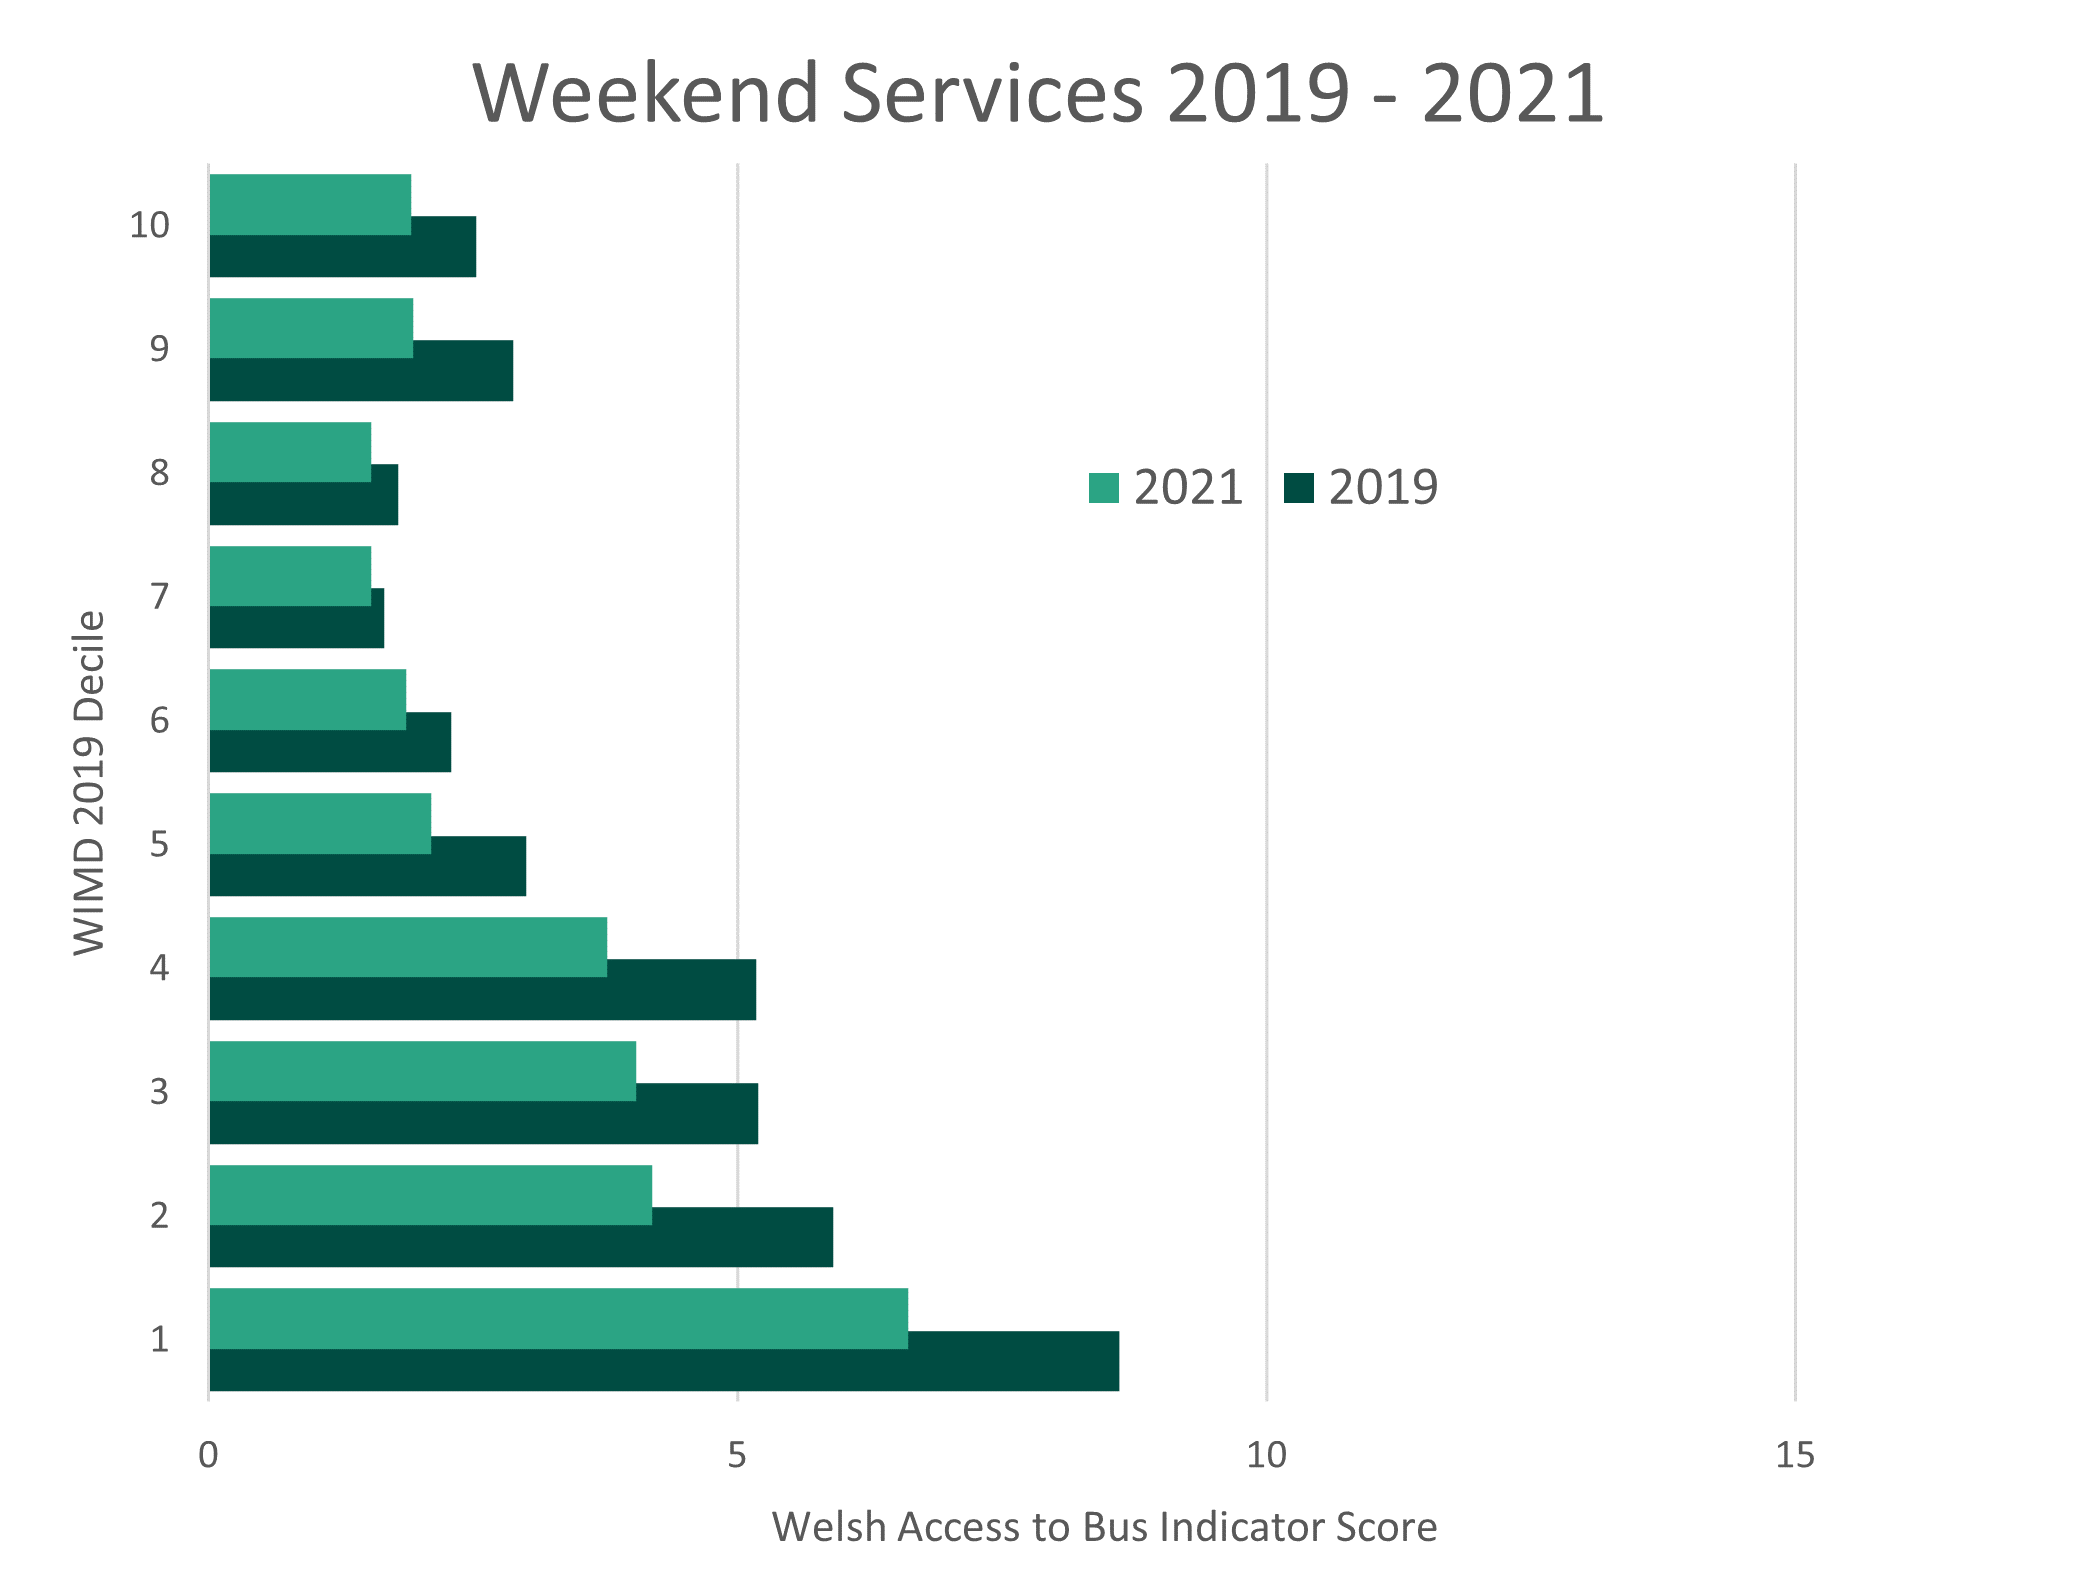 Two charts showing median Welsh Access to Bus Indicator scores in 2019 and 2021 by WIMD decile. The top chart shows weekdays, the bottom chart shows weekends.